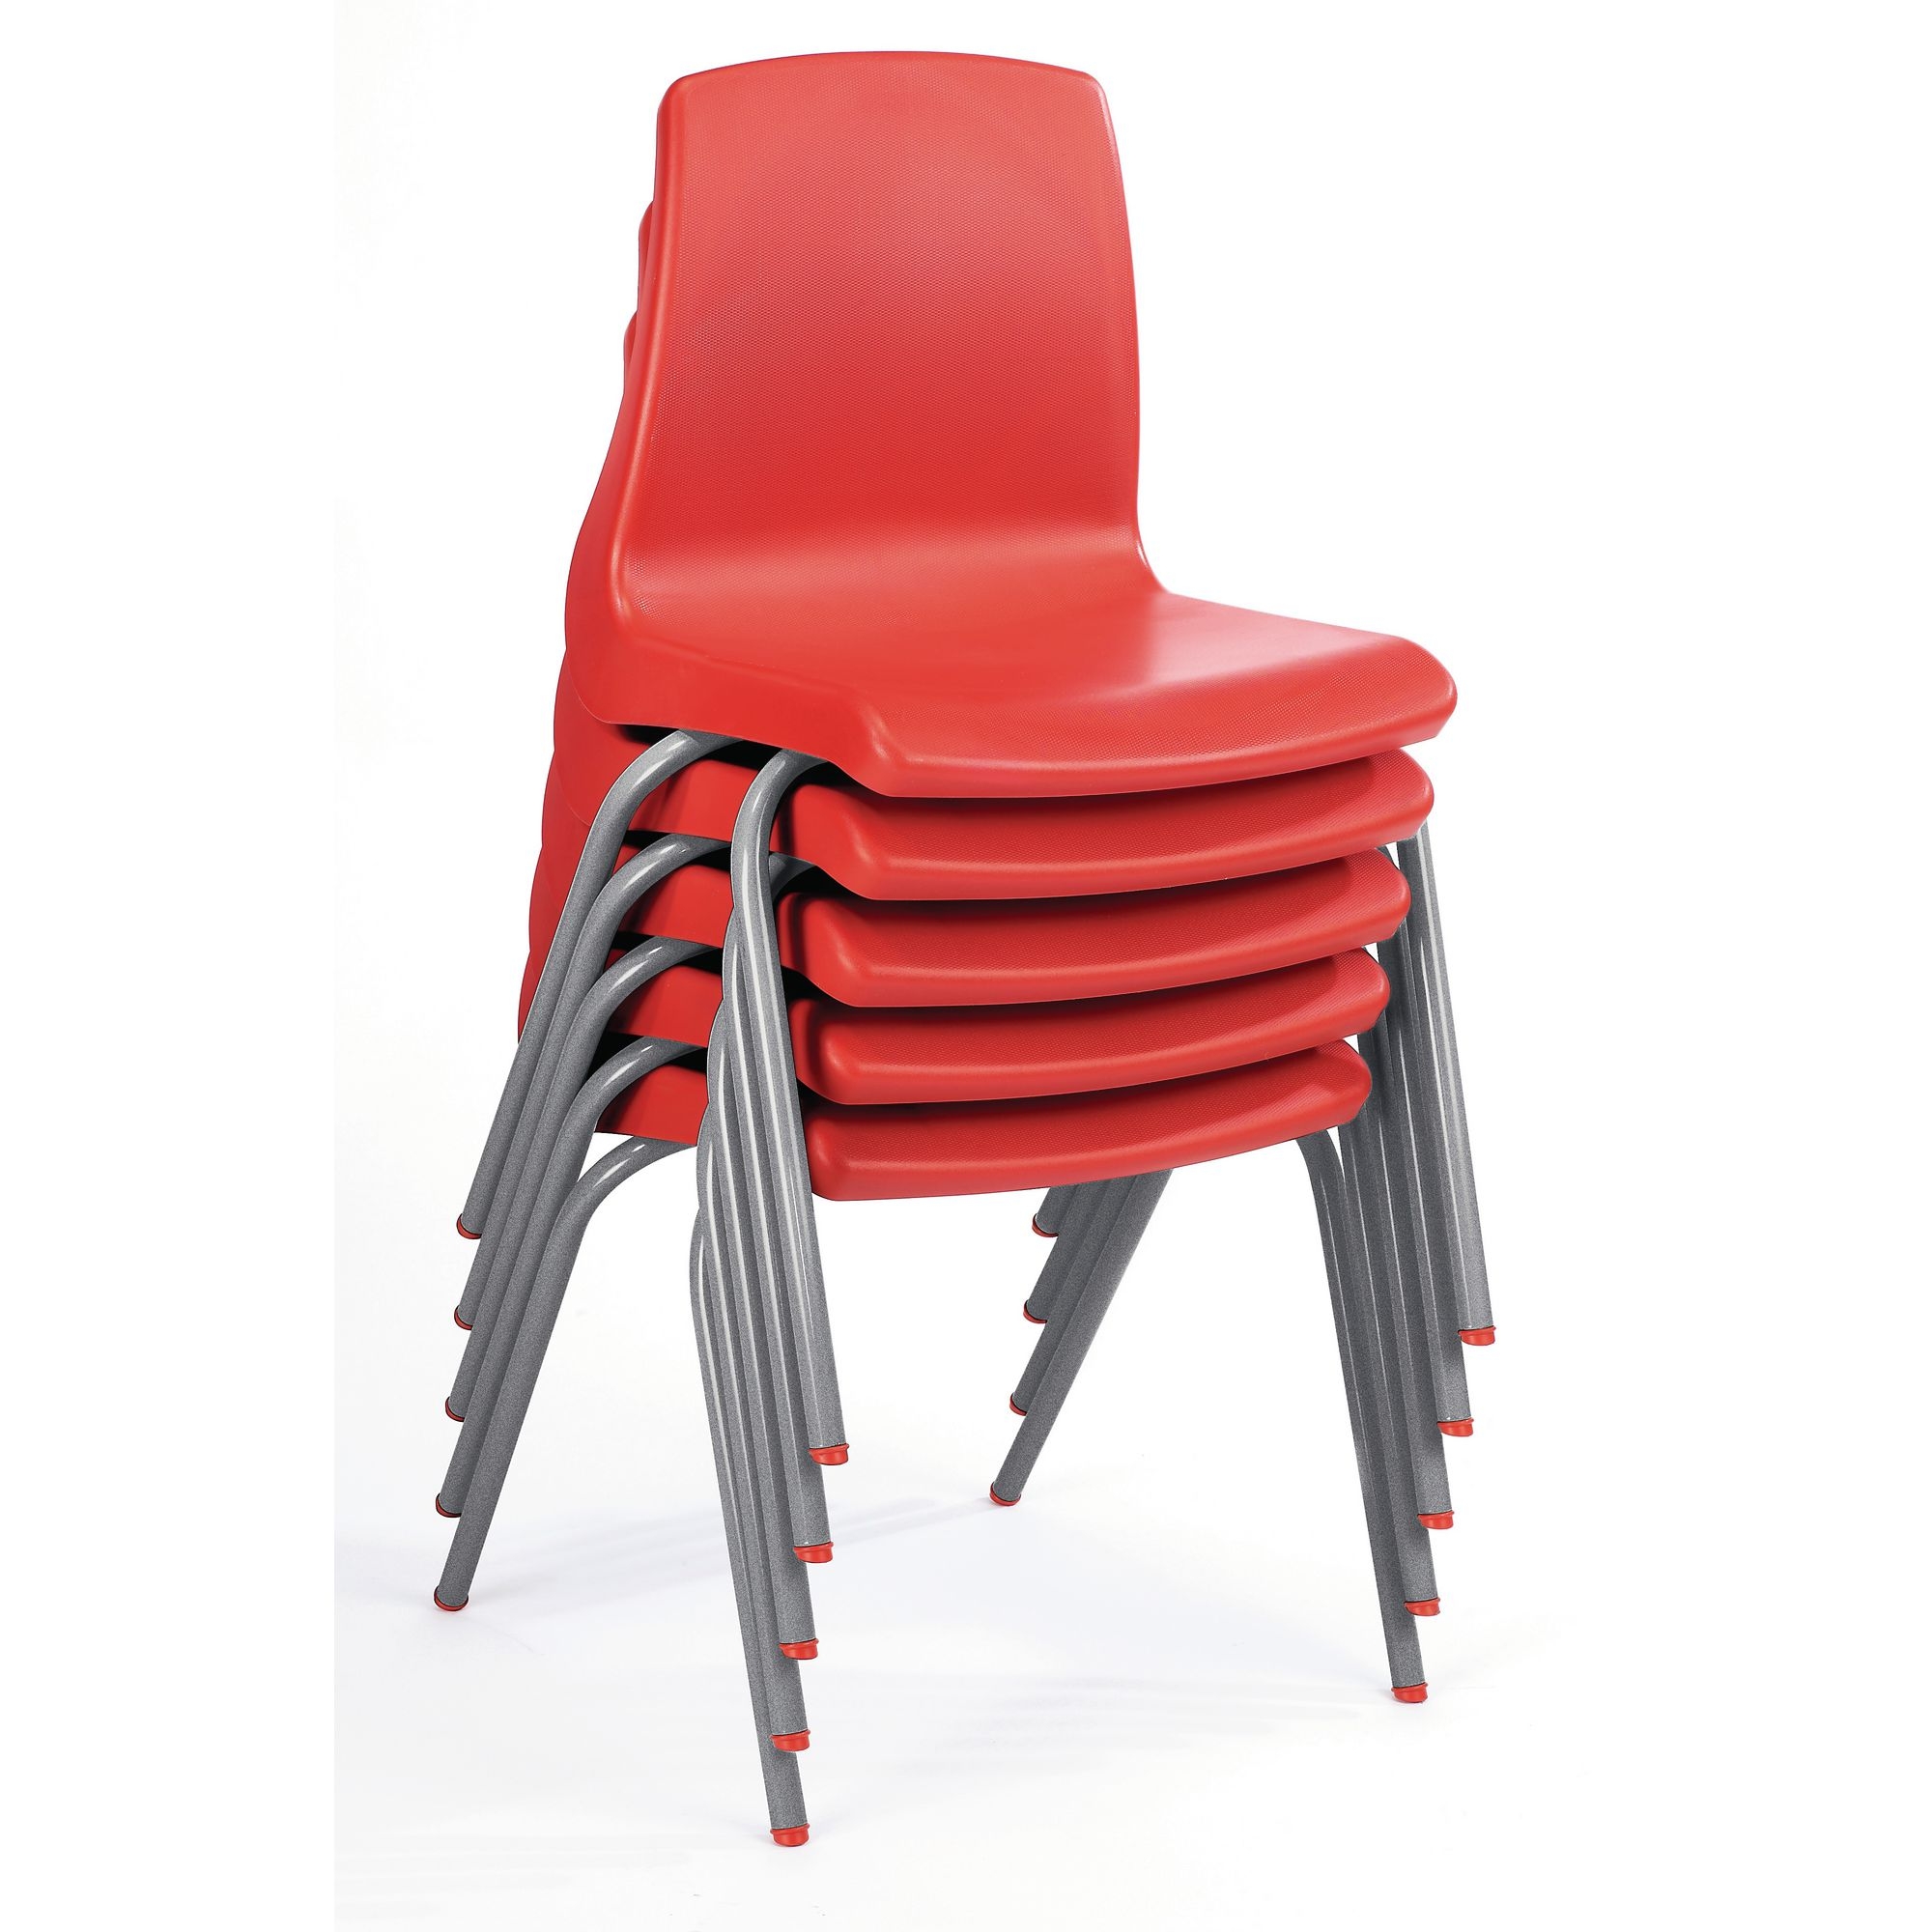 NP Chair Class Packs - Red - Seat height:260mm